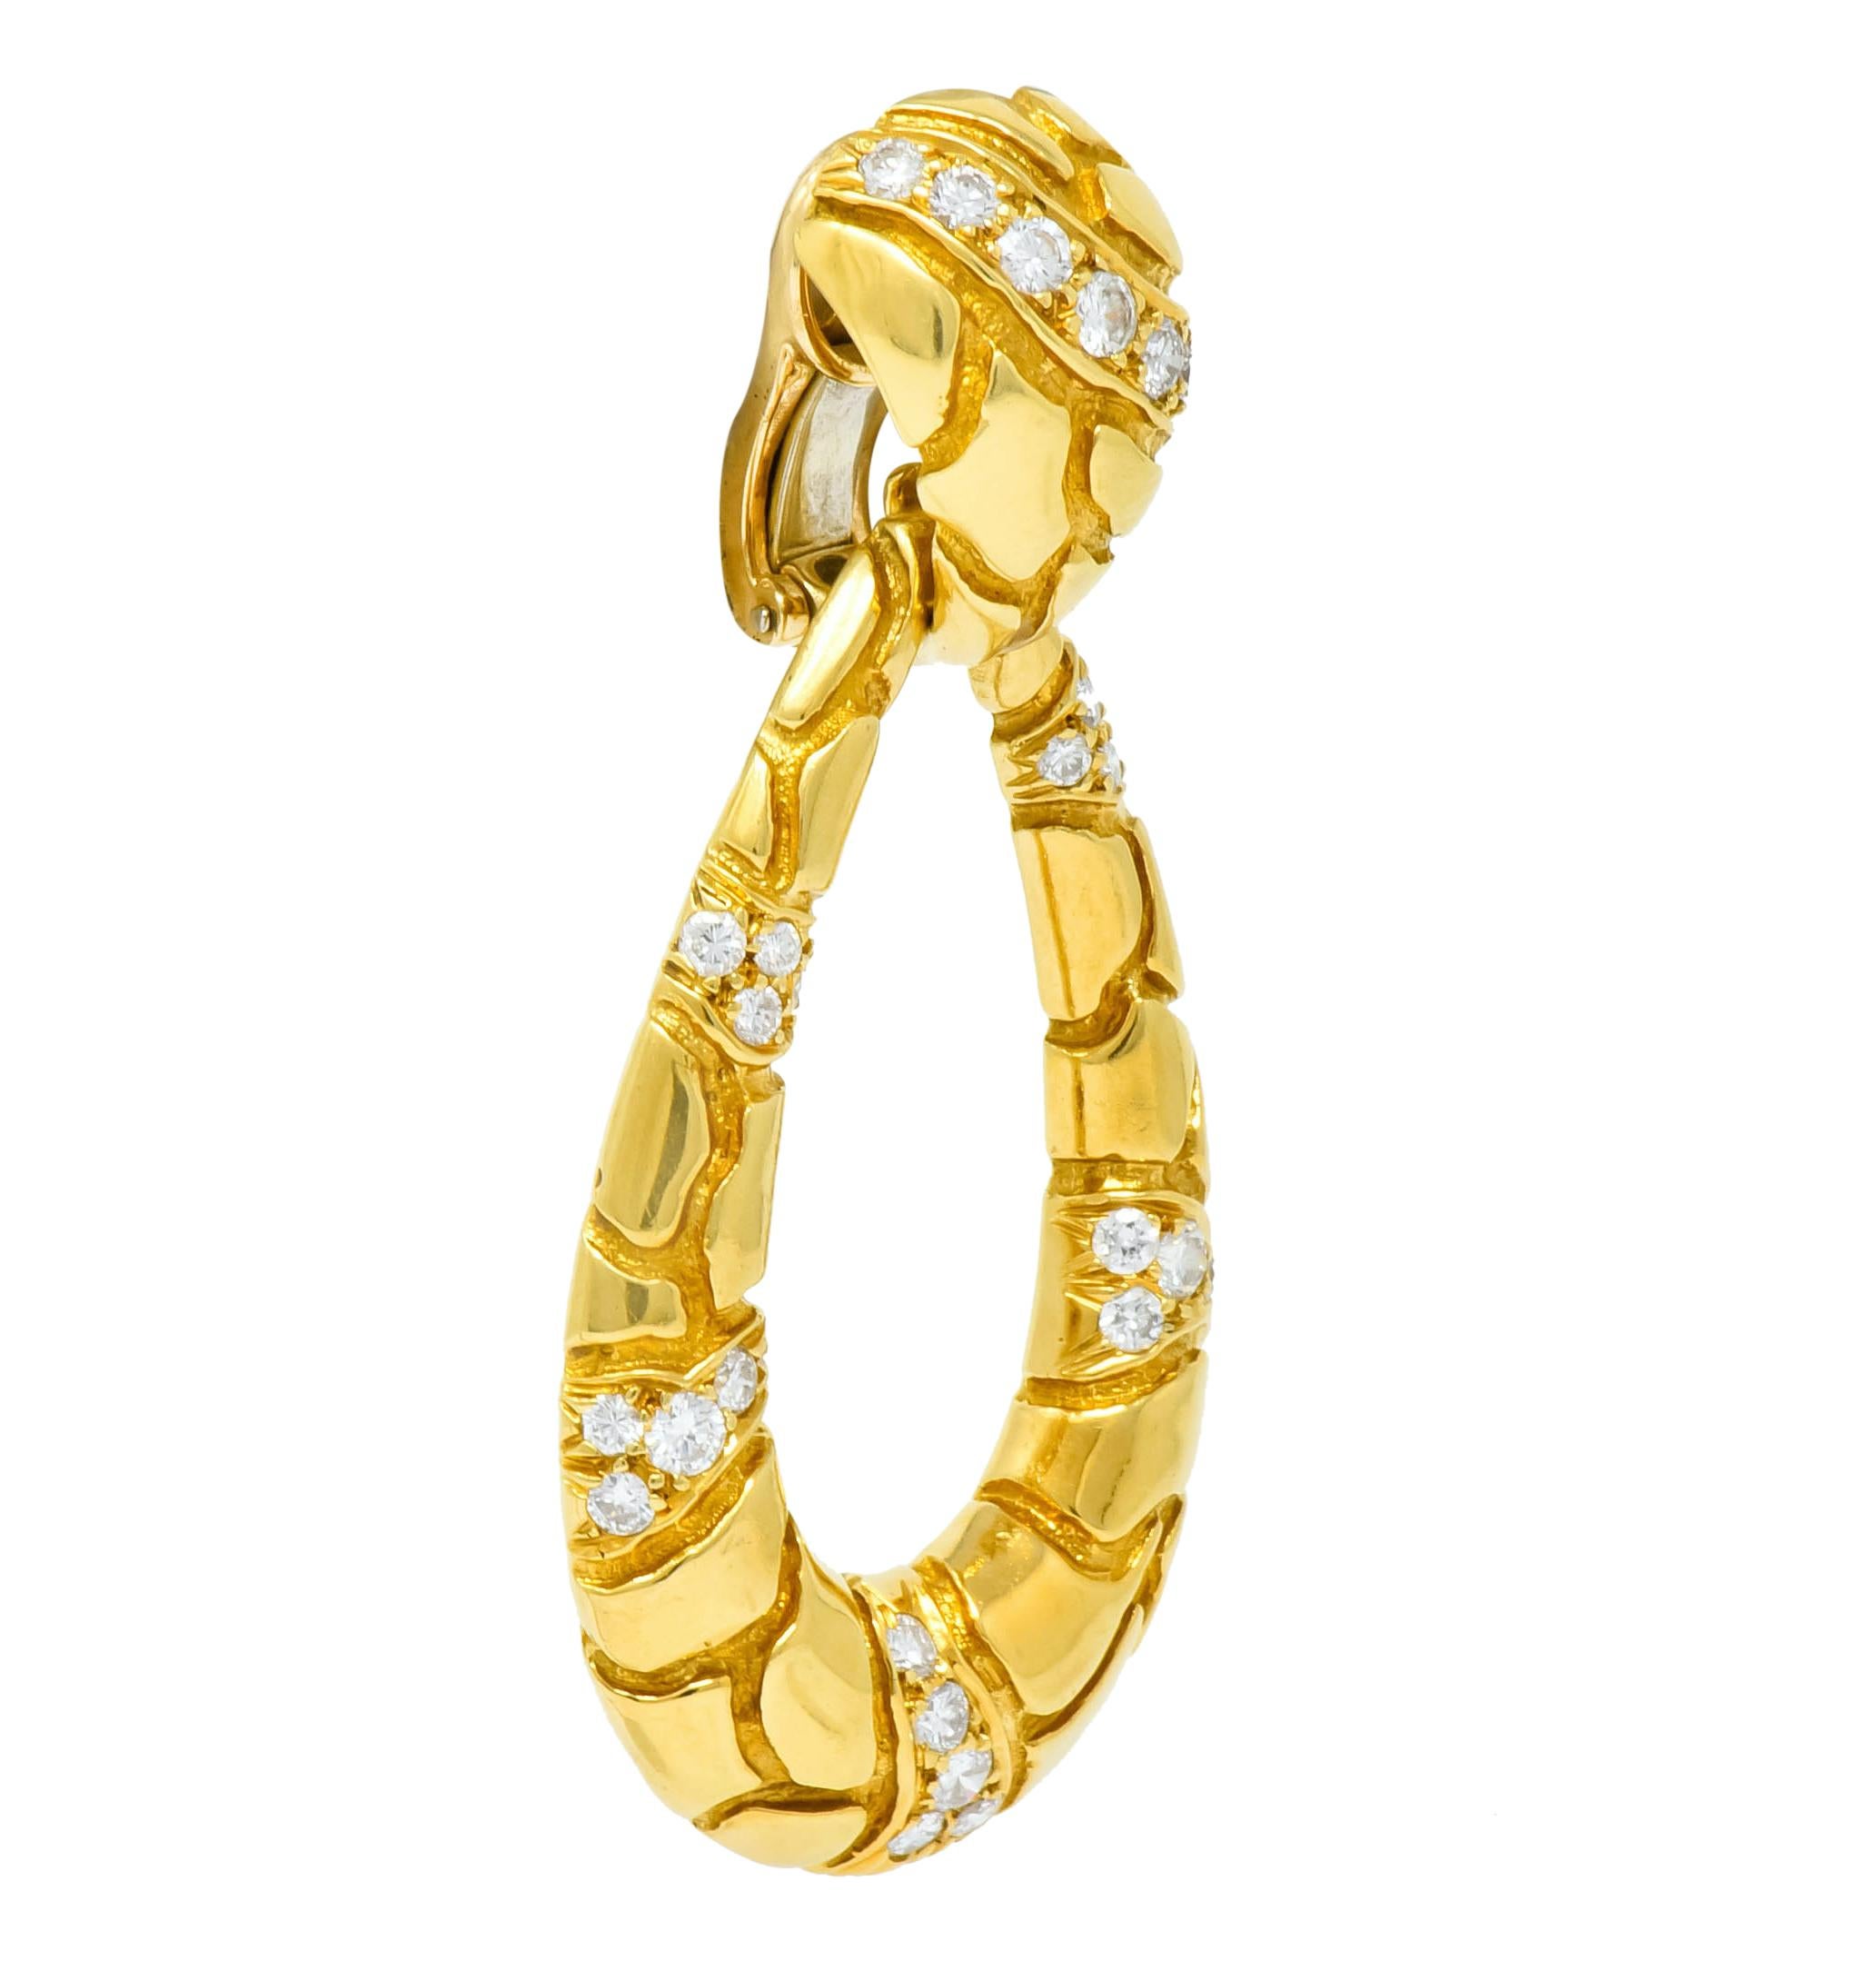 Ear-clips designed as triangular surmounts with large, removable drops featuring a polished gold finish with recessed cracked motif

Bead set throughout with round brilliant diamonds weighing approximately 2.00 carat total, F/G color and VS